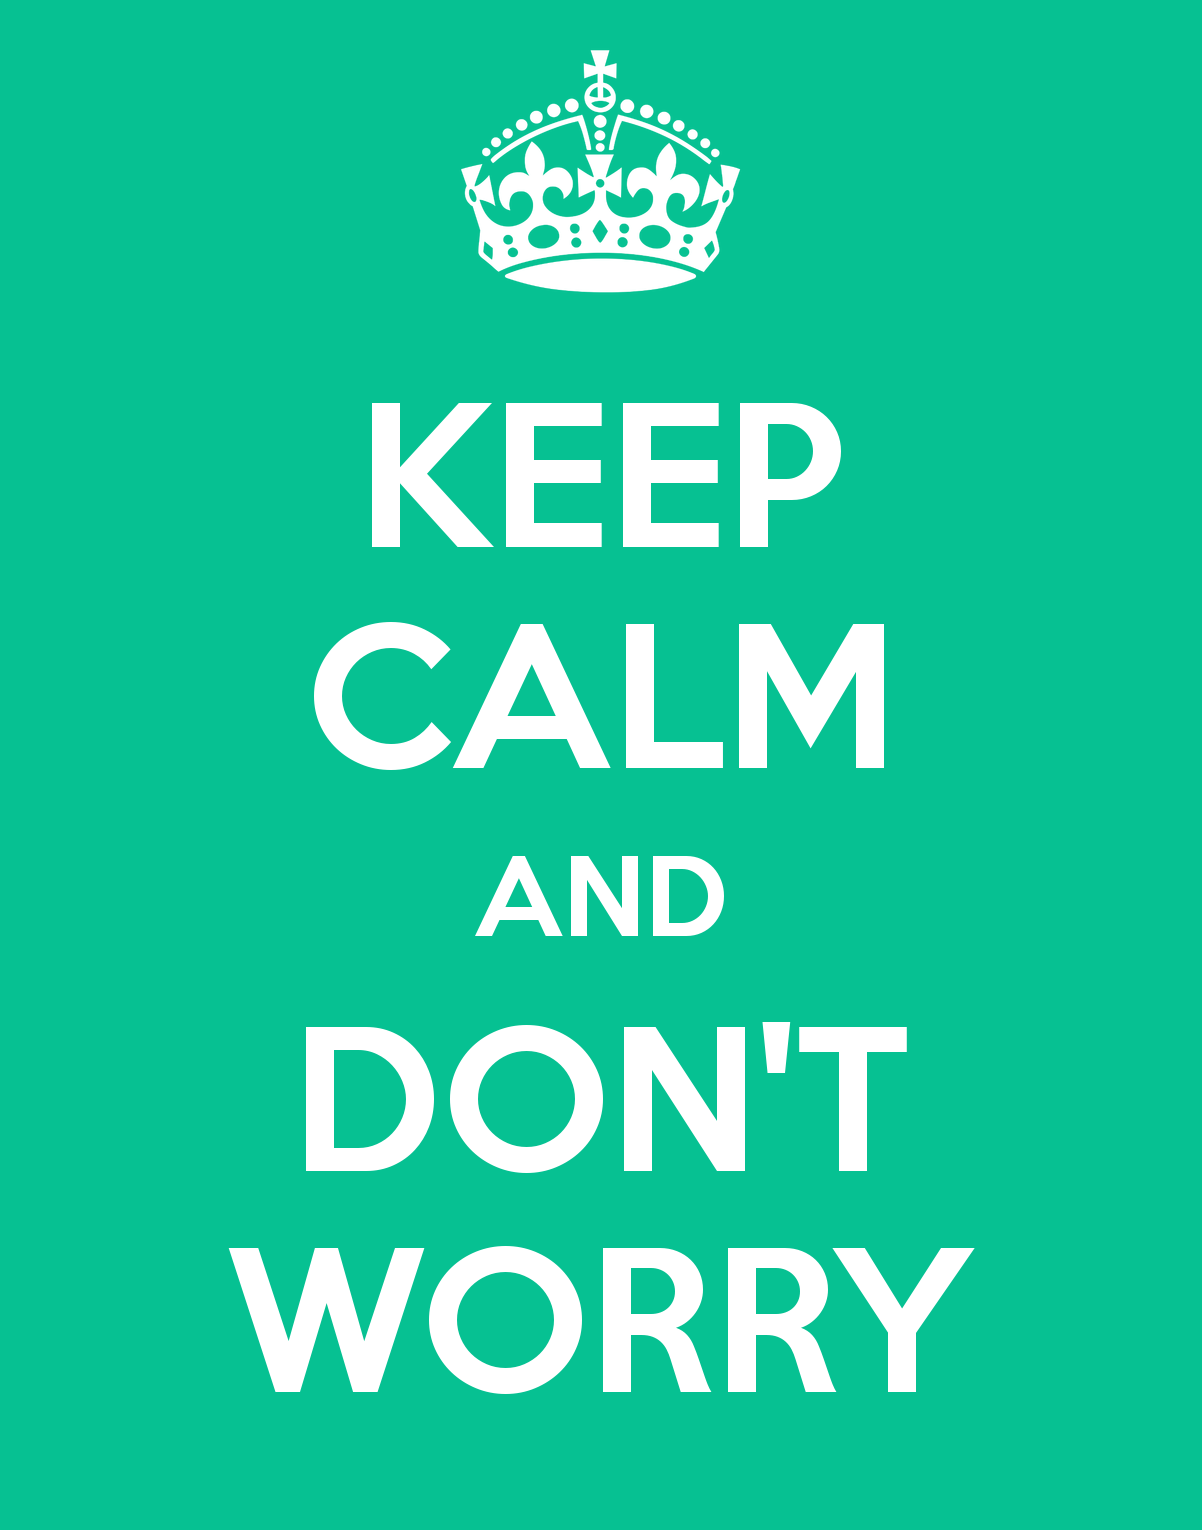 Don t worry dont. Don't worry. Keep Calm and don't worry. Keep Calm and be Happy. Don't worry be Happy.